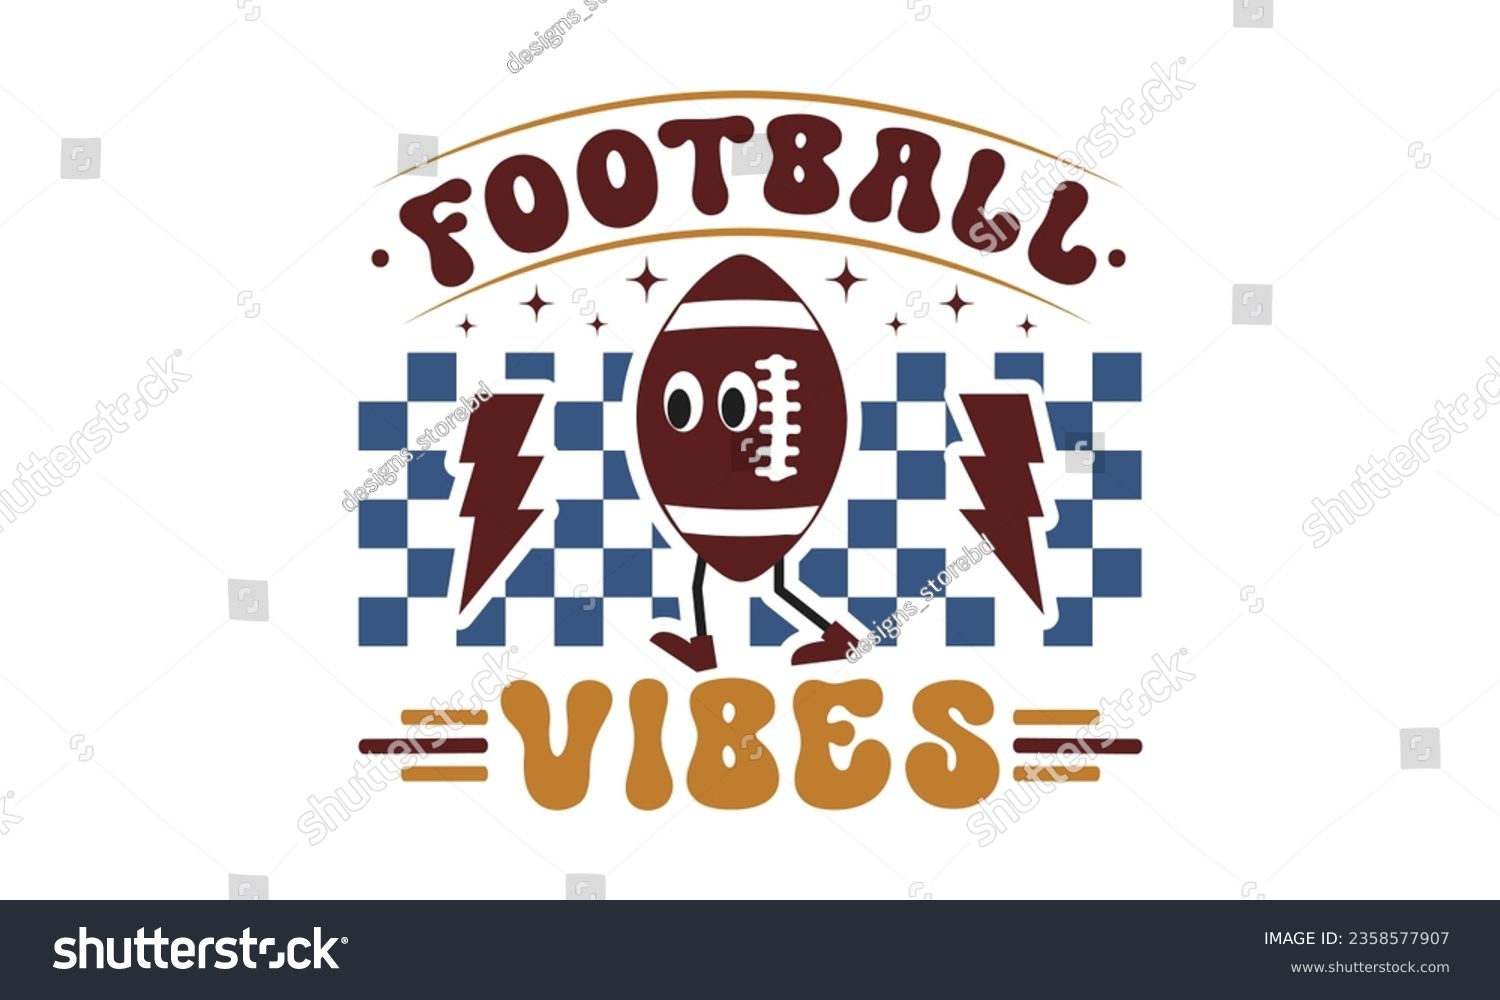 SVG of Football vibes svg, Football SVG, Football T-shirt Design Template SVG Cut File Typography, Files for Cutting Cricut and Silhouette Cut svg File, Game Day eps, png svg